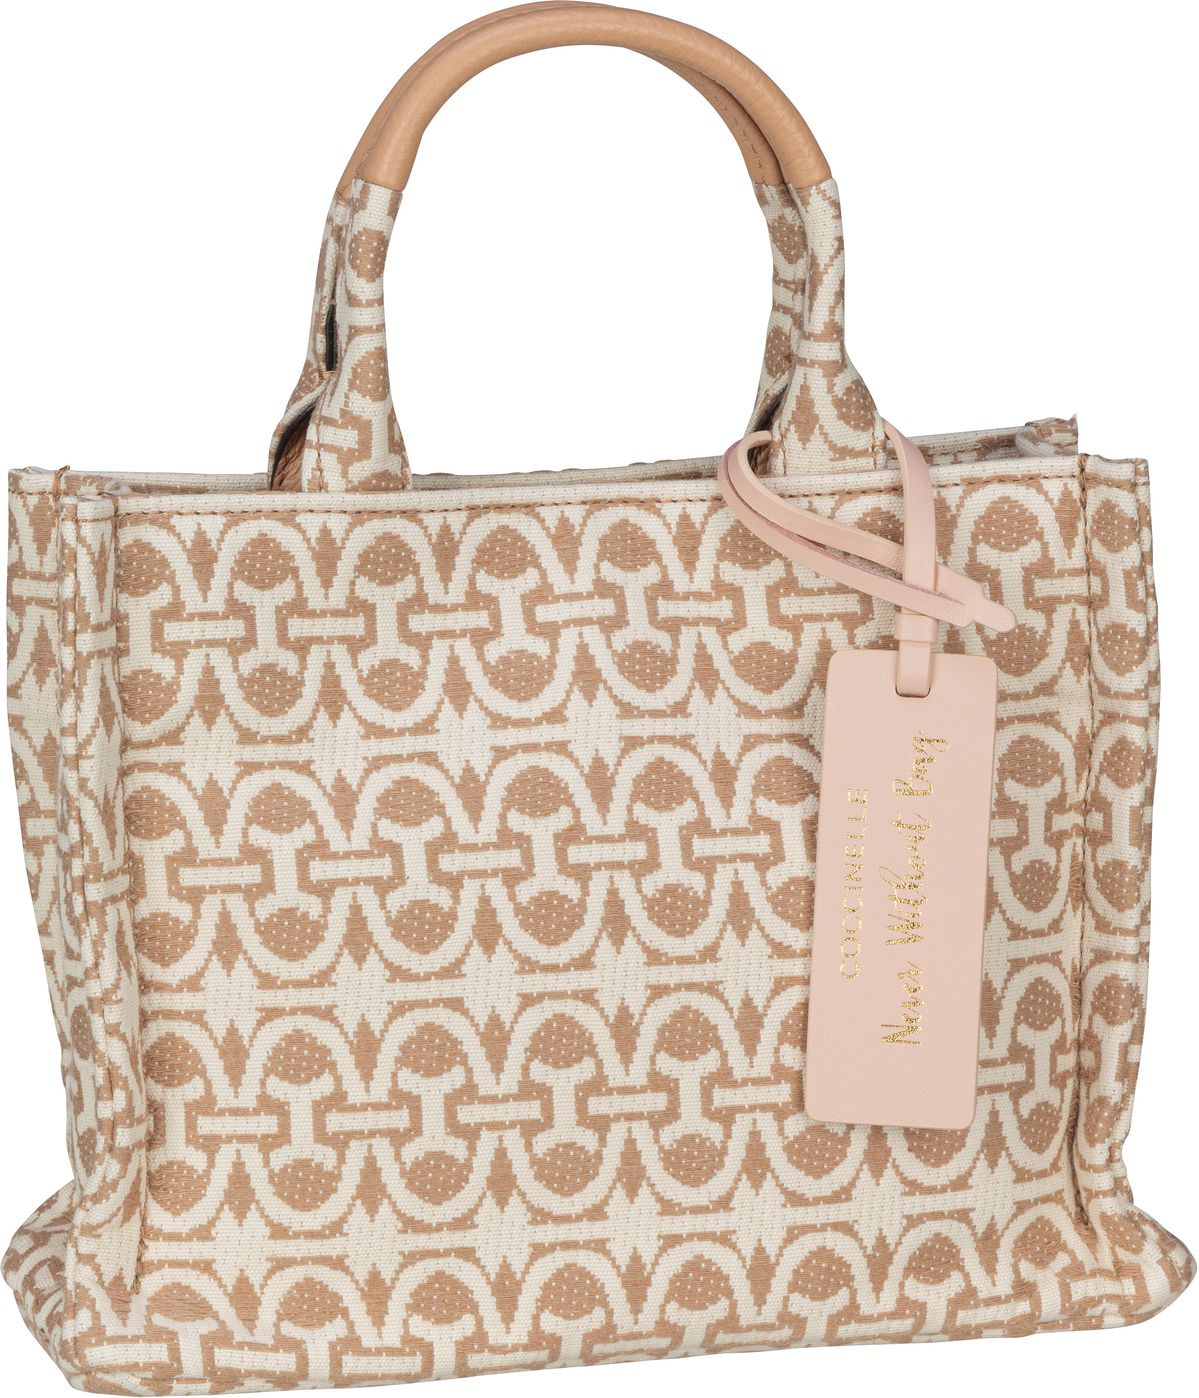 Coccinelle Never Without Bag 1803 - Multi Natural/Toasted